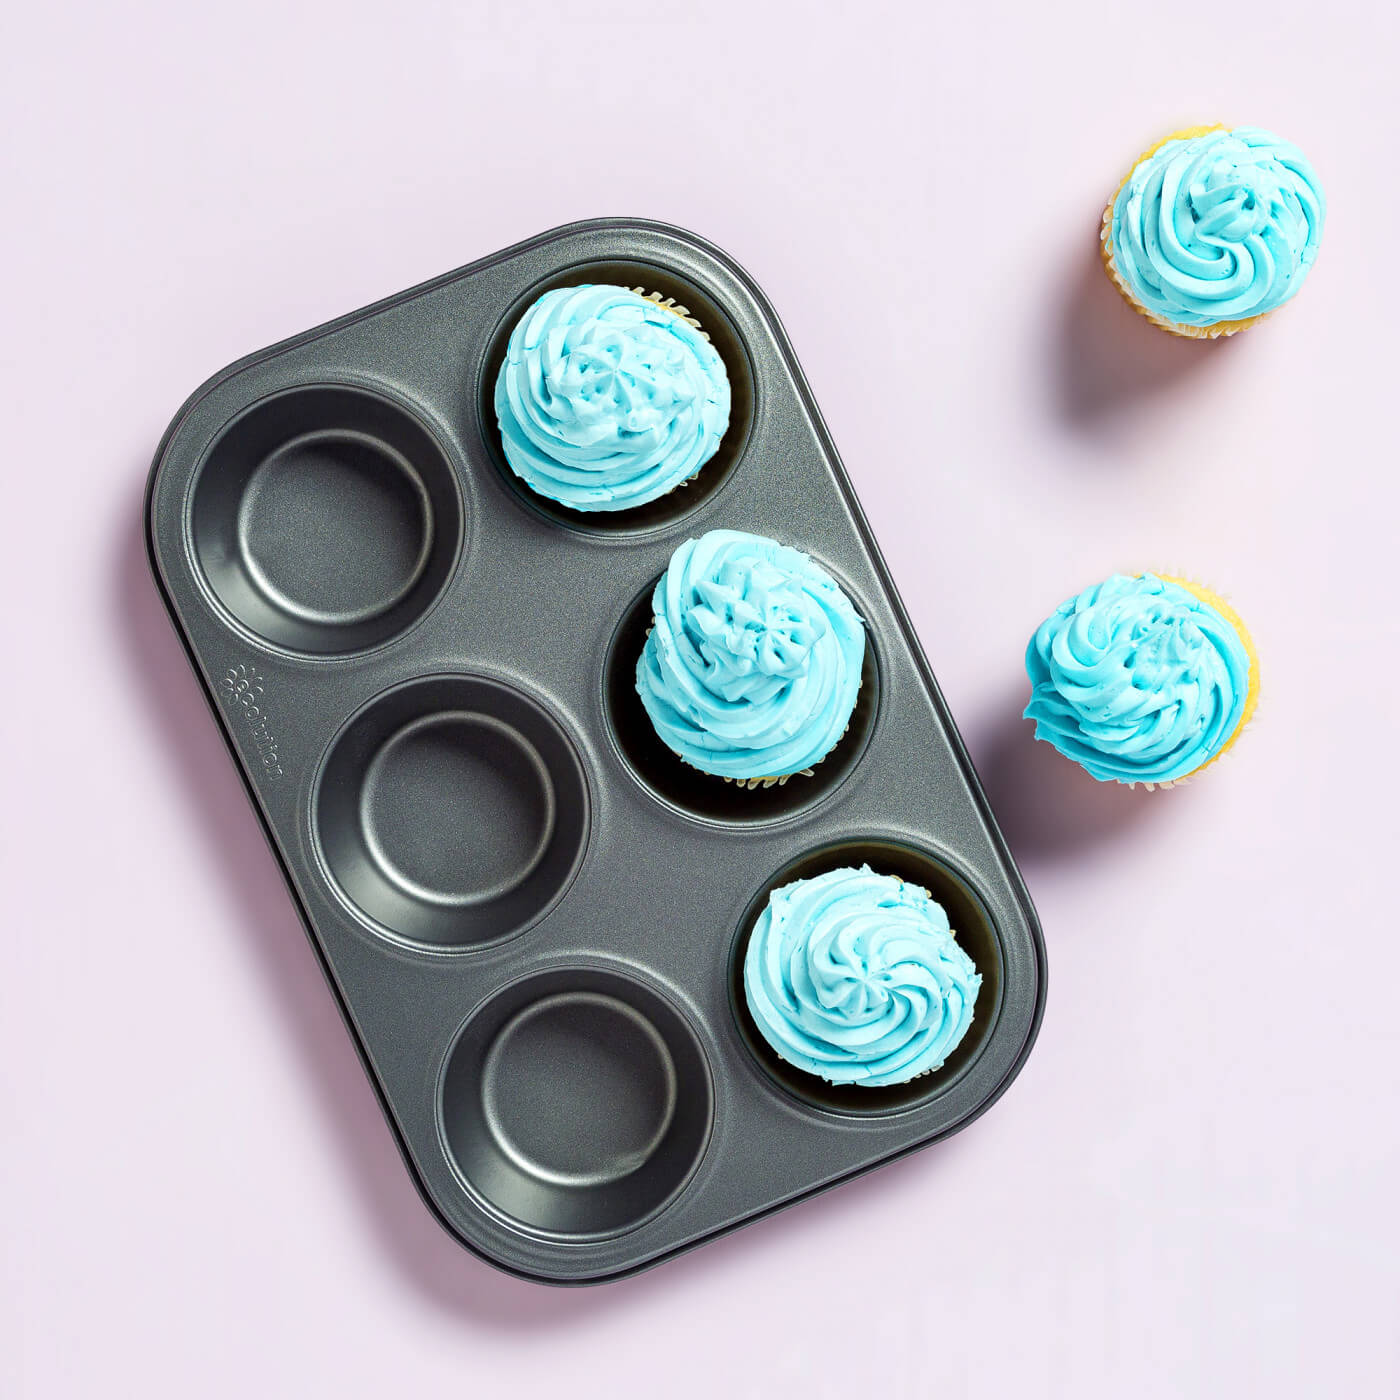 Different Ways to Use a Muffin and Cupcake Pan